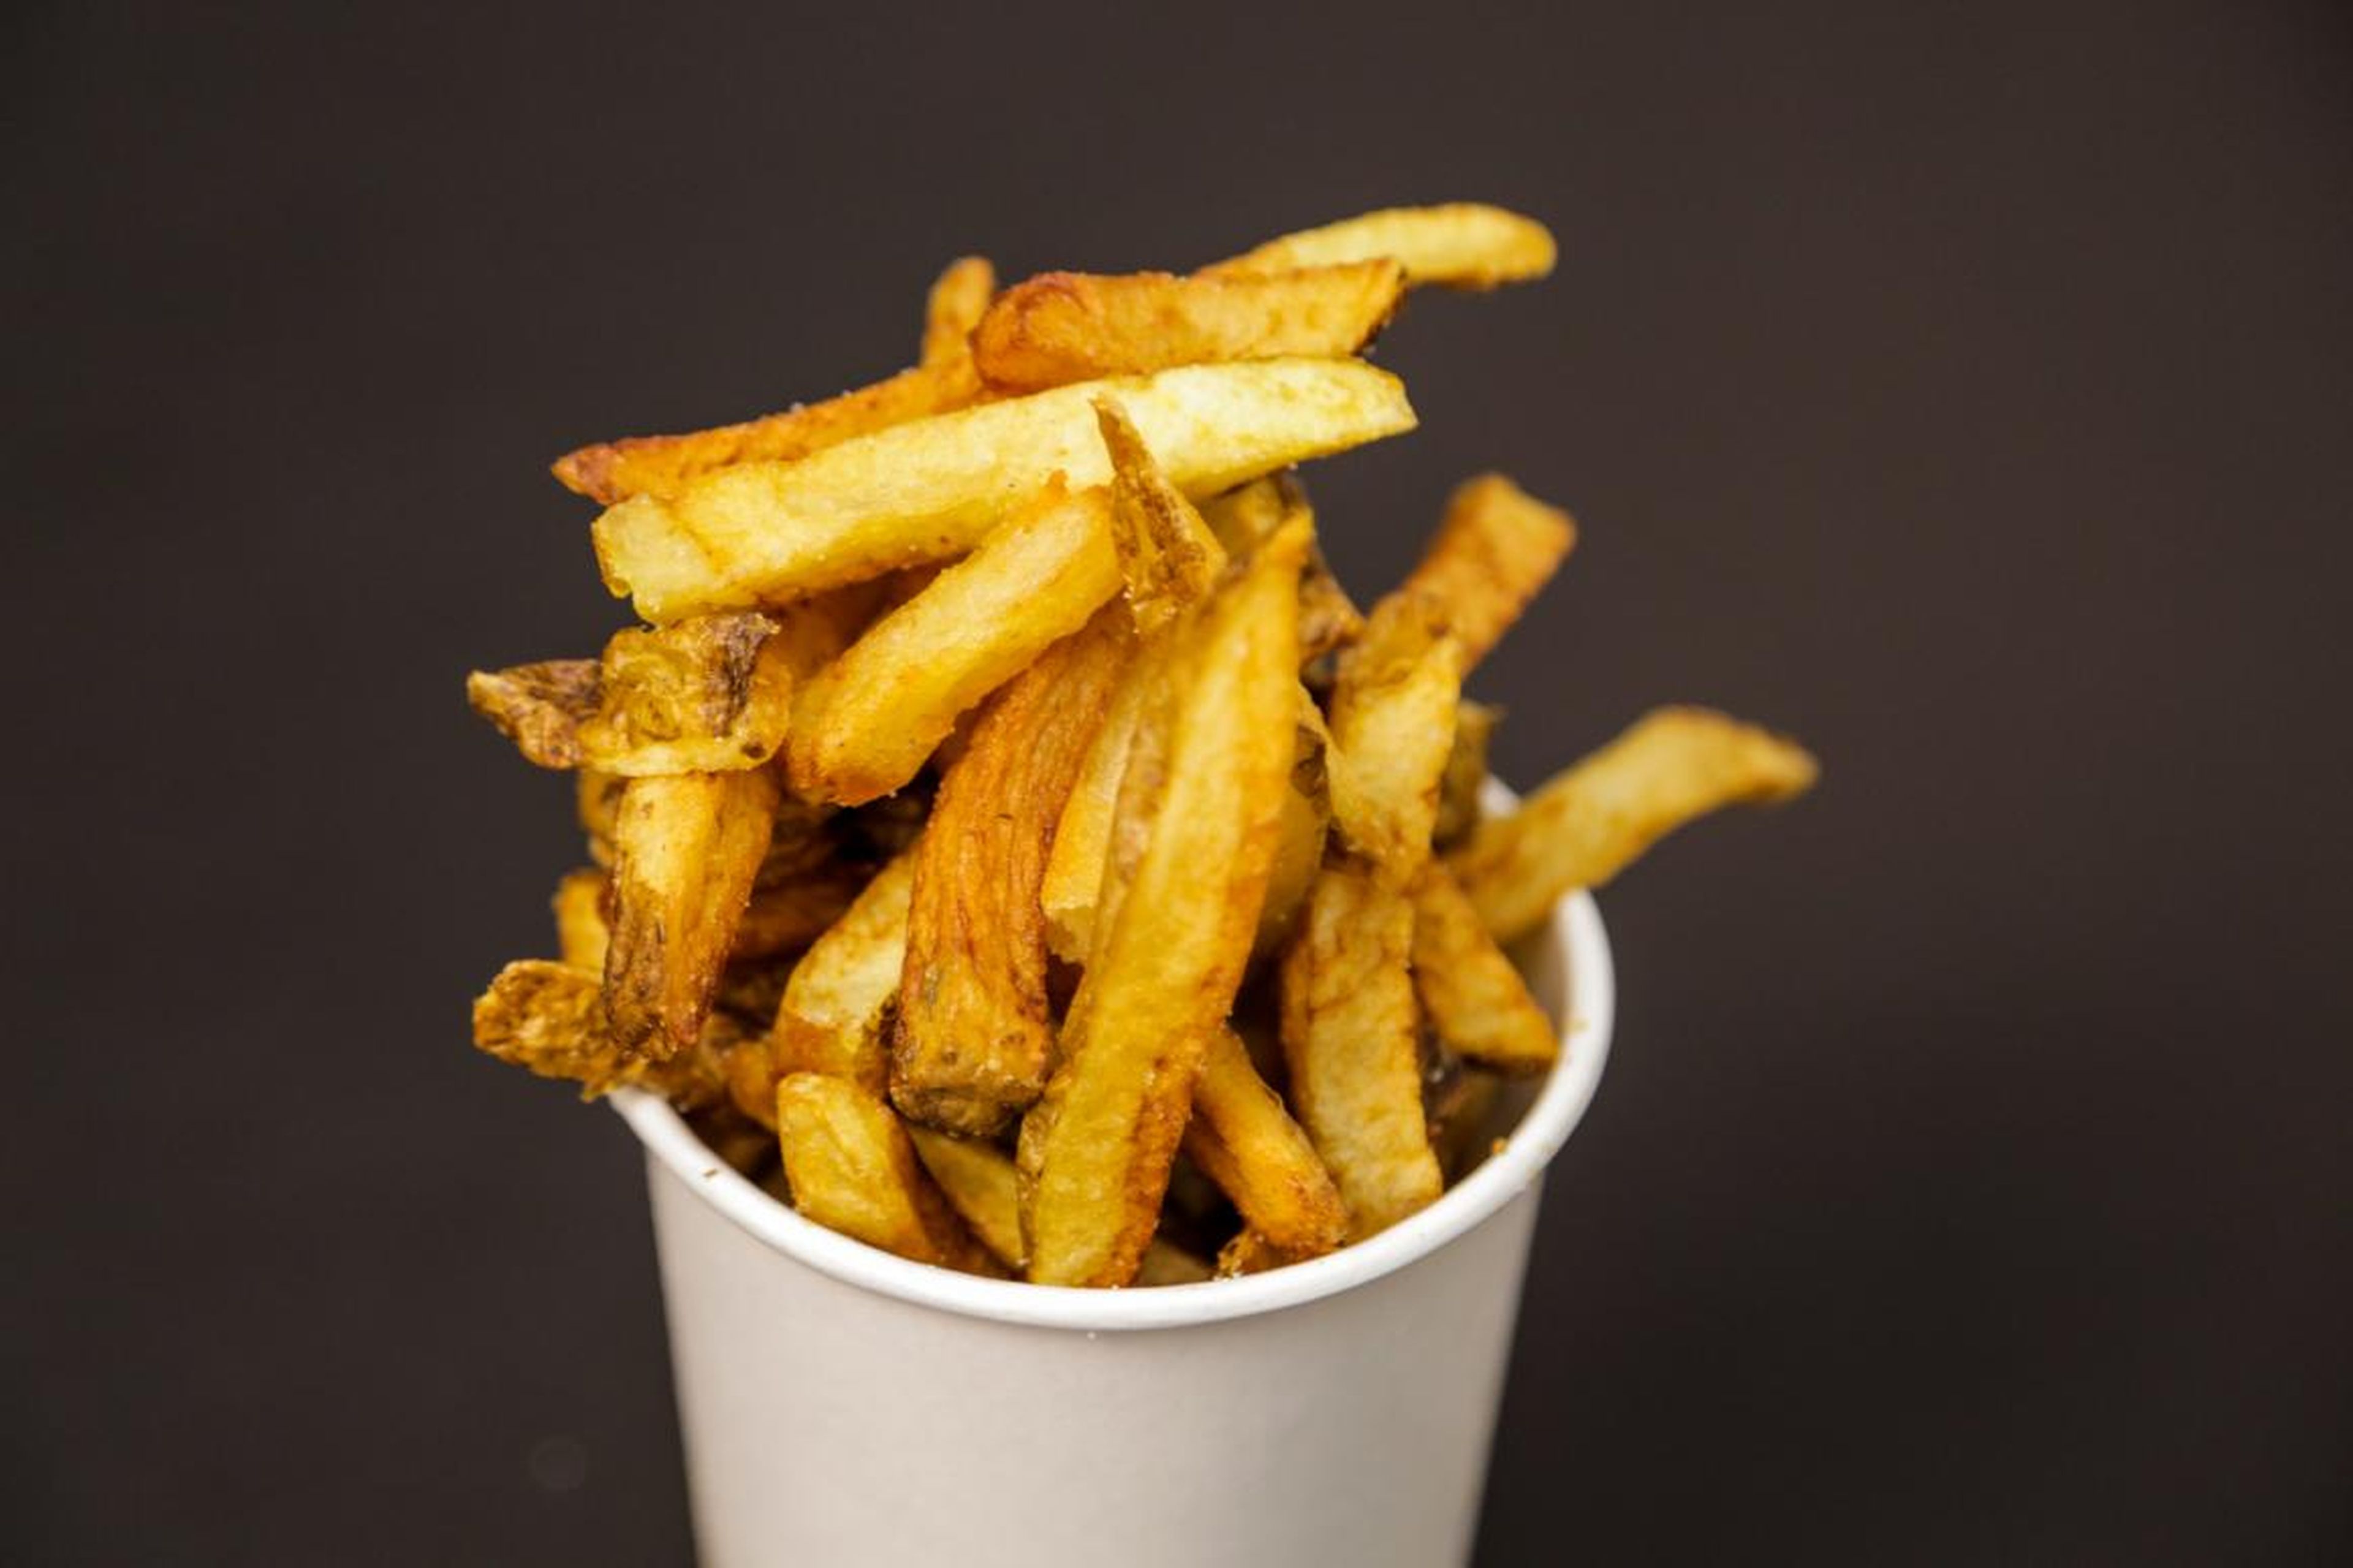 Despite their quantity and freshness, these fries are just less satisfying — they're only sort of crispy and sort of salty. Five Guys relies too heavily on the "real potato" appeal of its fry at the expense of flavor. They have a